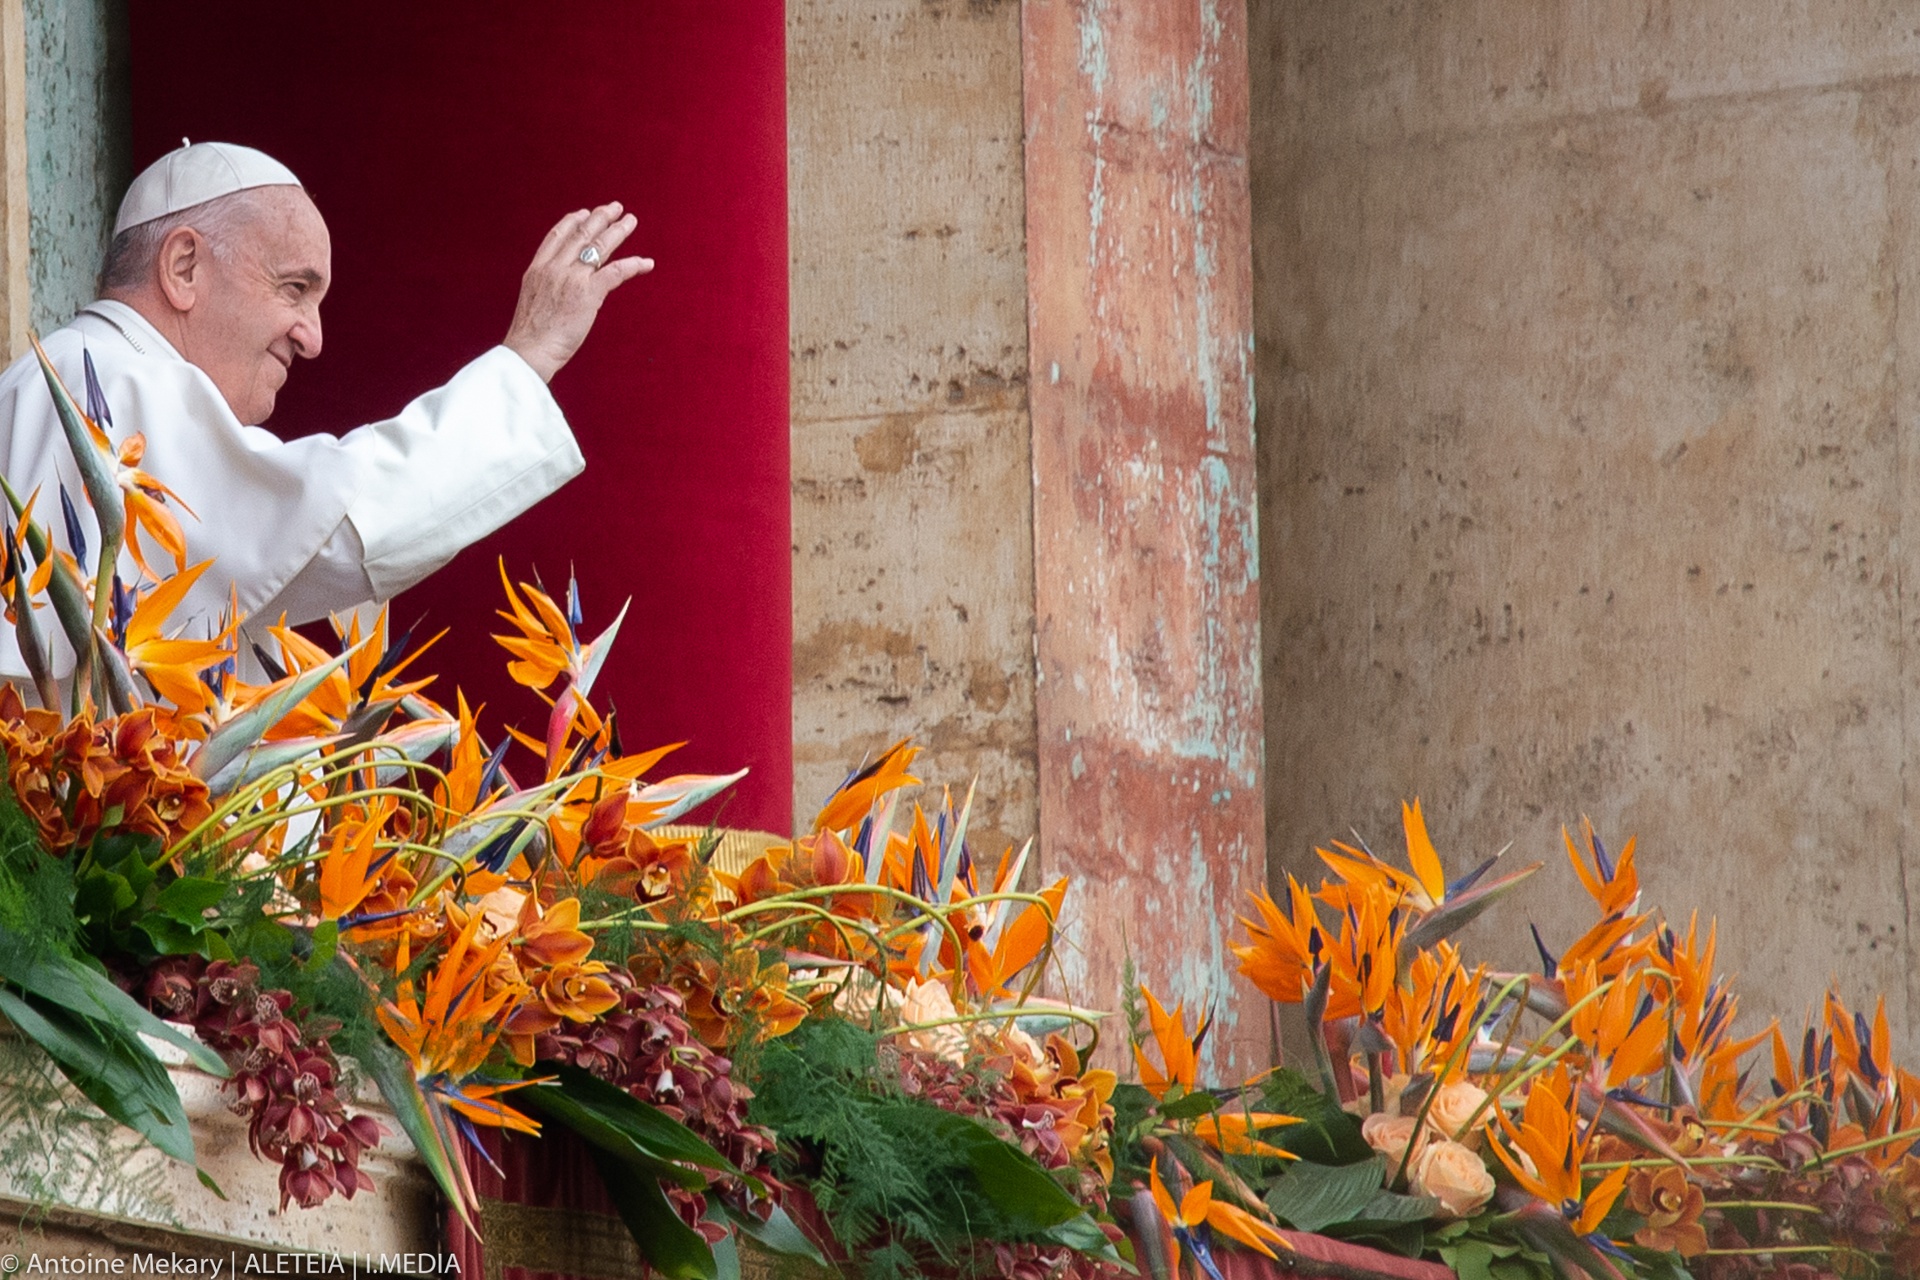 RTÉ to broadcast Pope Francis' extraordinary 'Urbi et Orbi' blessing today